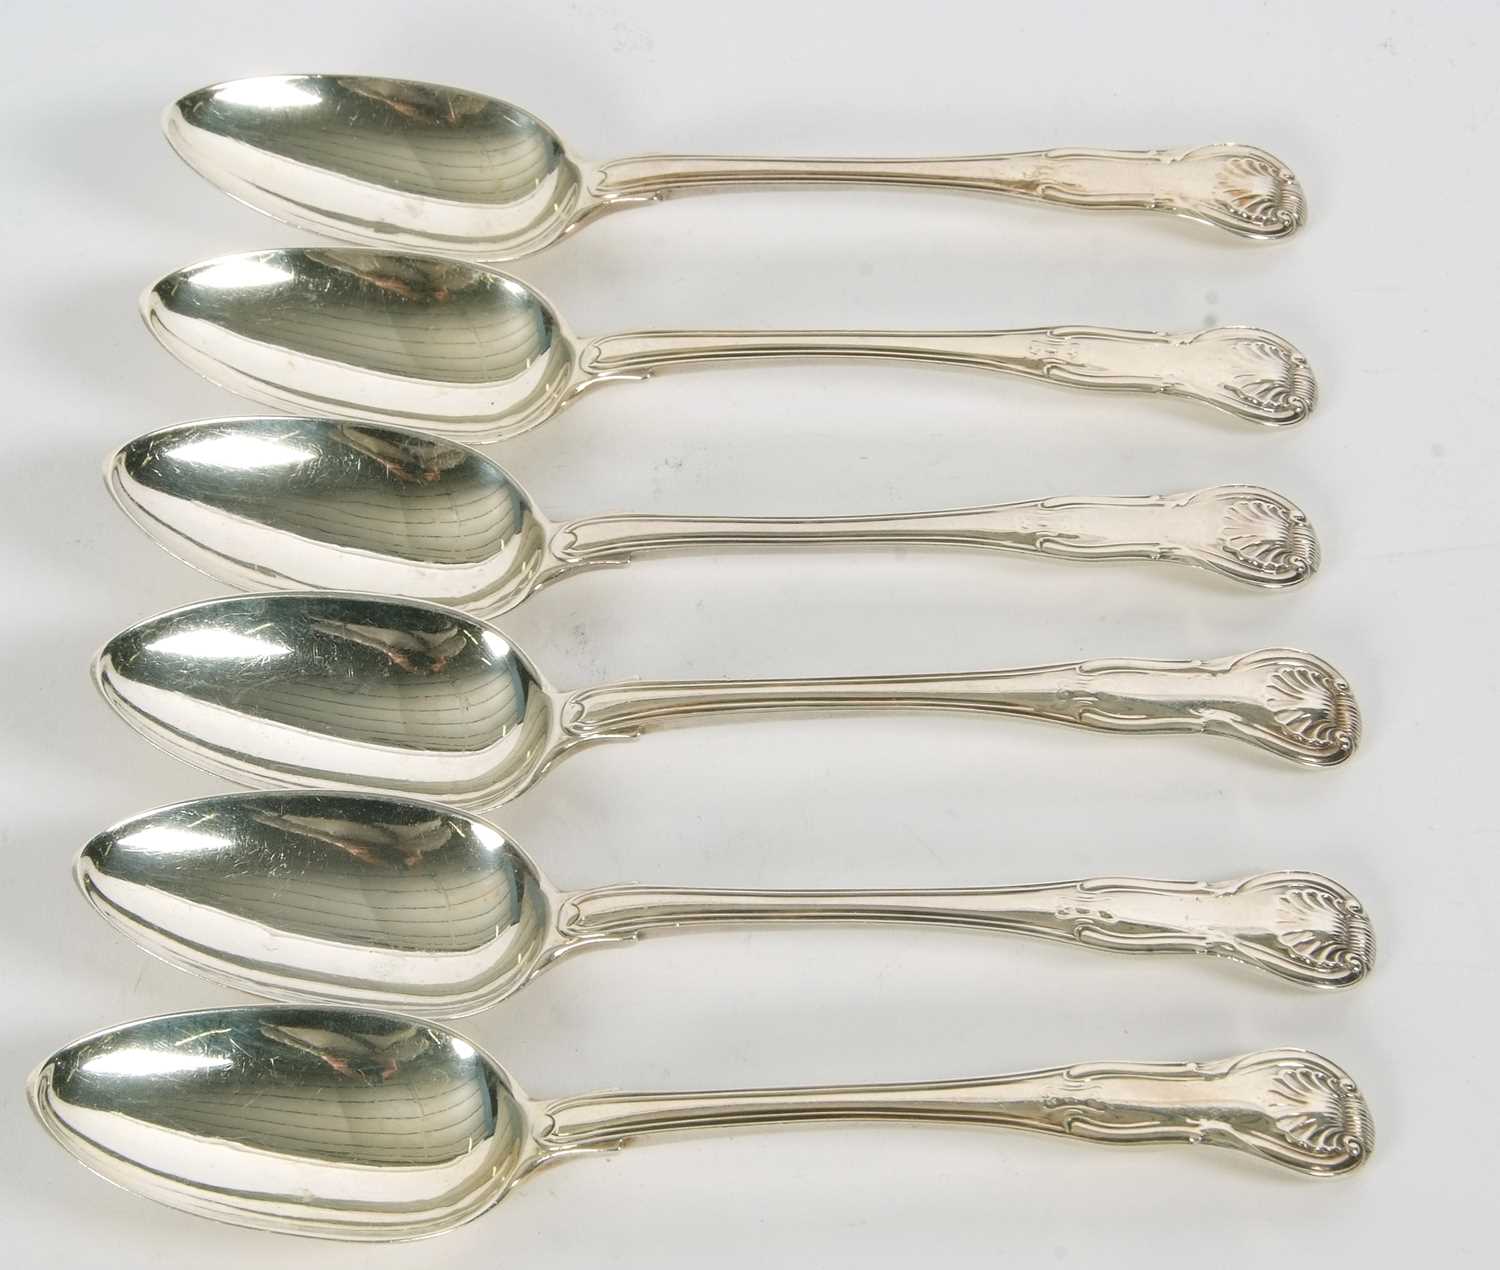 Six Victorian silver Kings pattern tablespoons, double struck, hallmarked for London 1874, makers